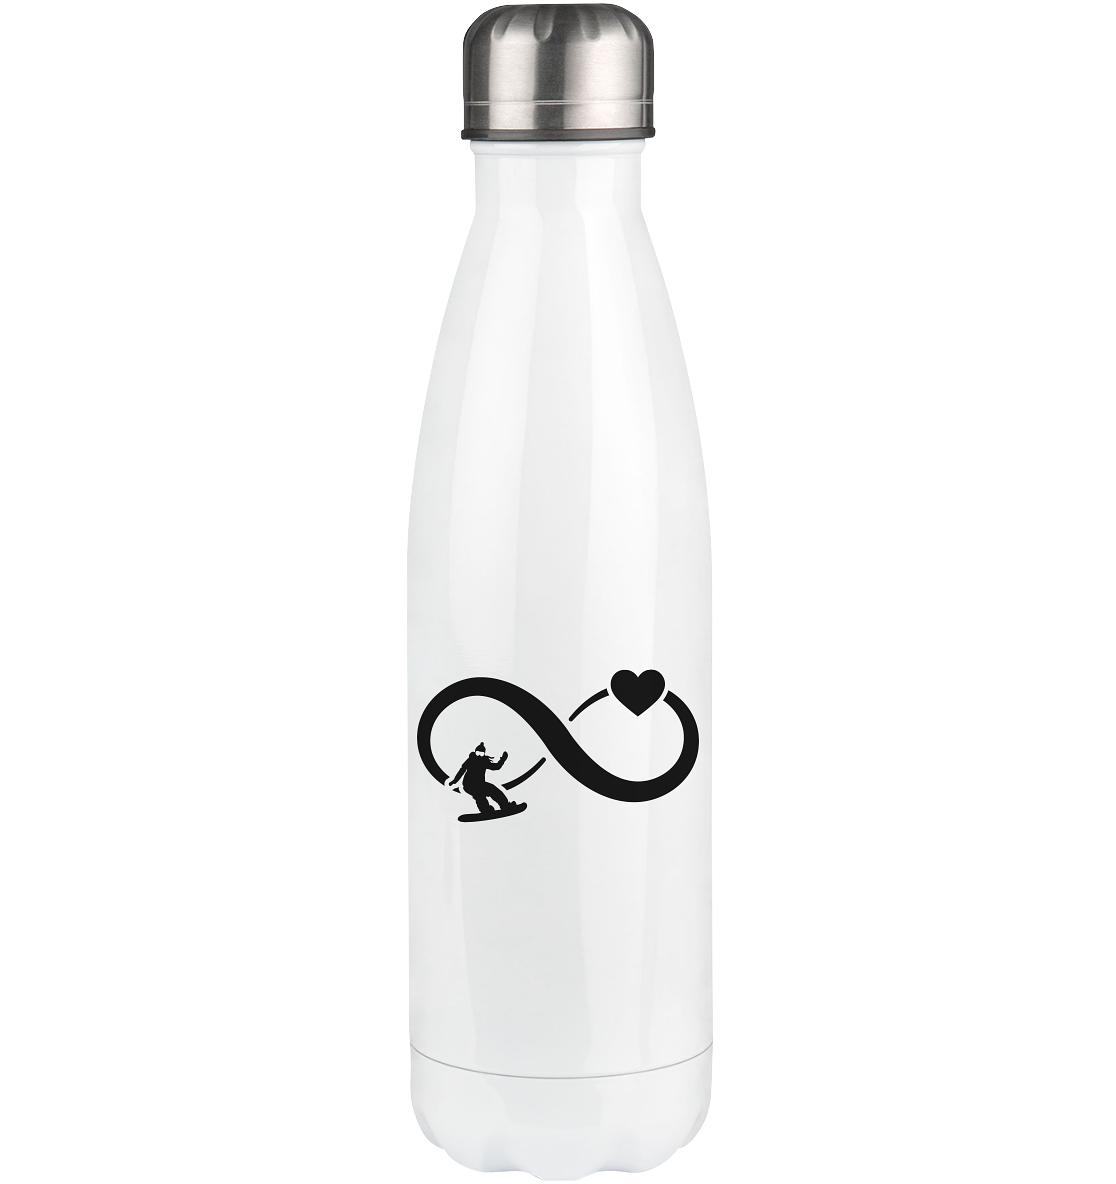 Infinity Heart and Snowboarding 1 - Edelstahl Thermosflasche snowboarden 500ml